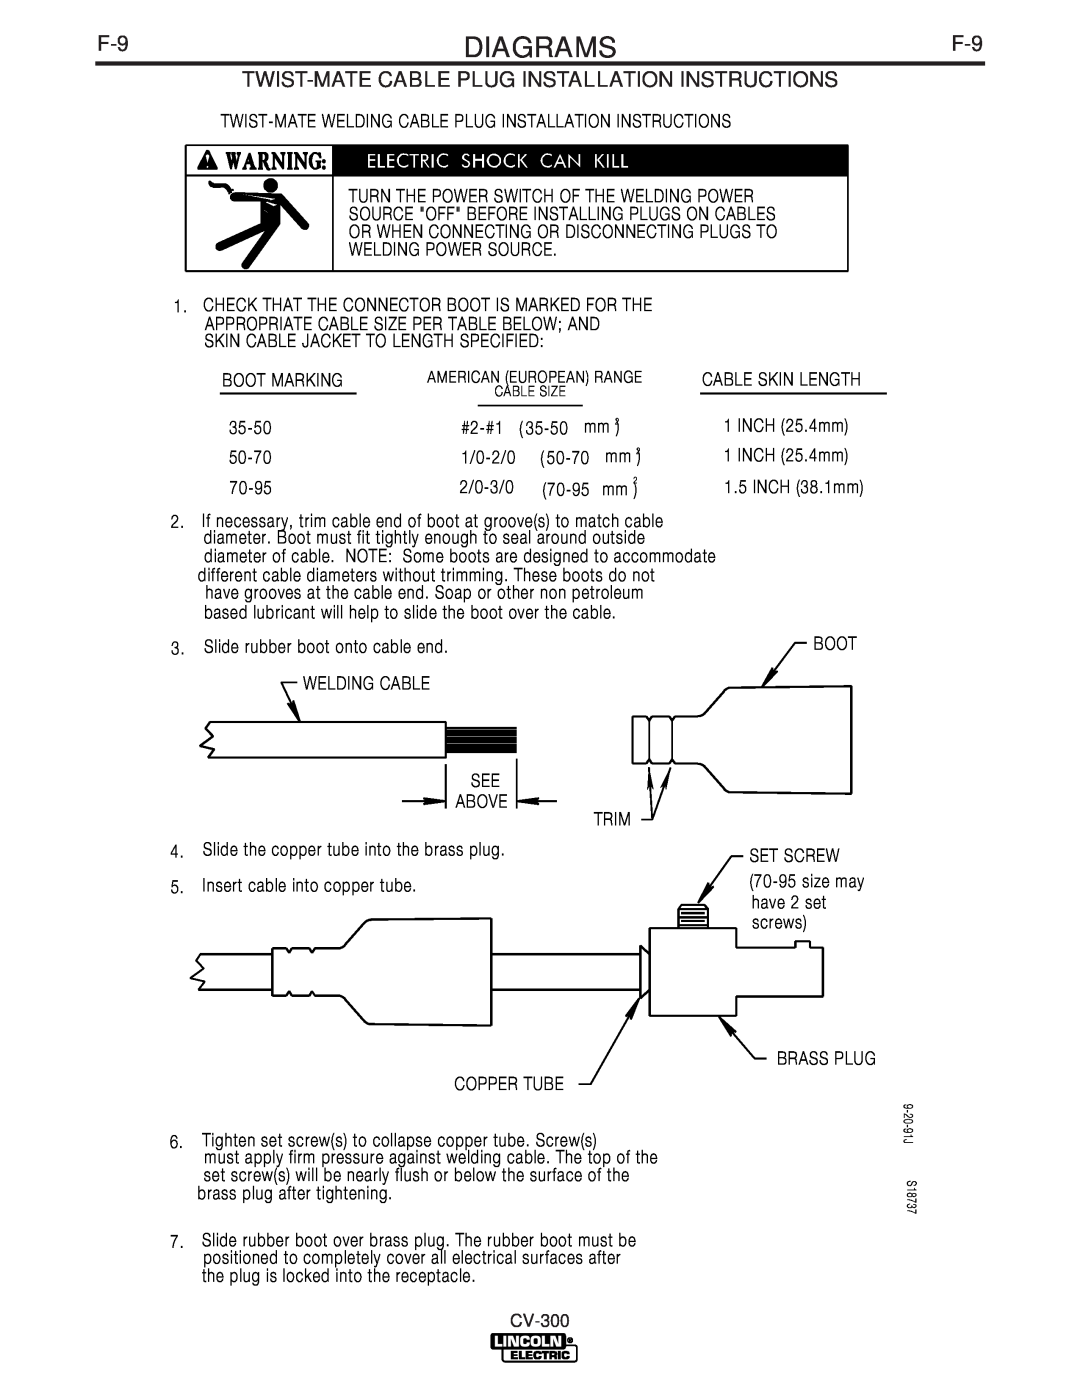 Lincoln Electric CV-300 manual Twist-Mate Cable Plug Installation Instructions, American European Range 